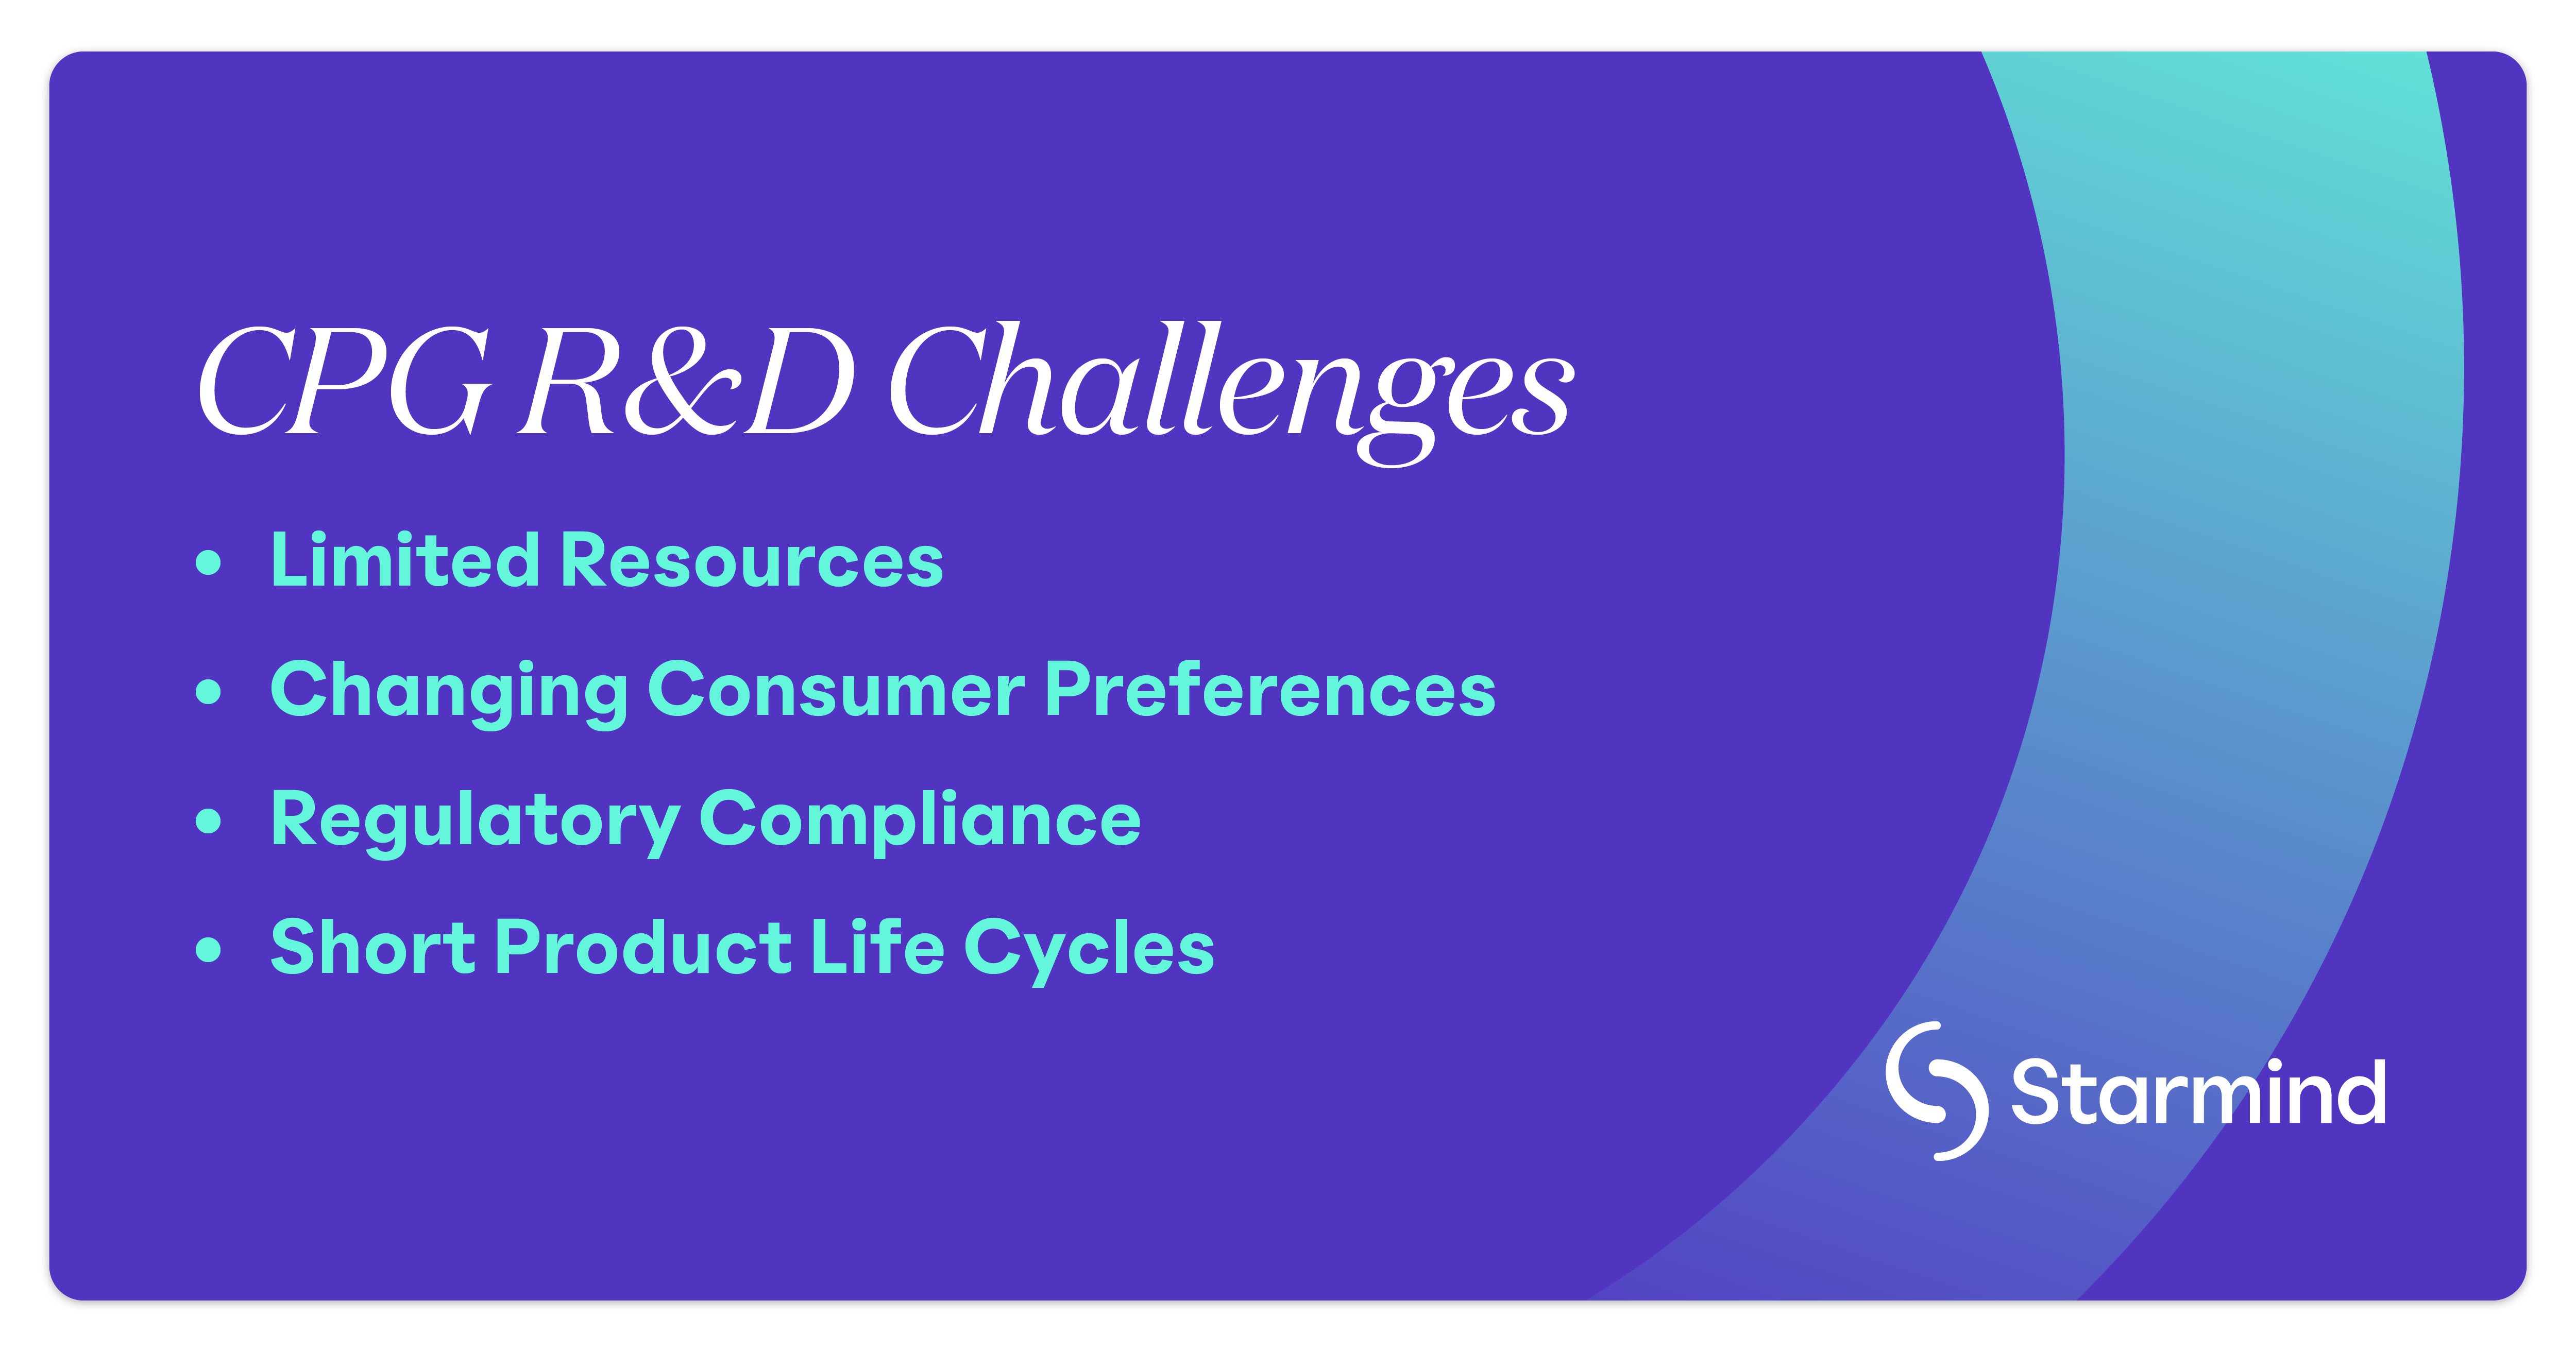 CPG R&D Challenges: Limited resources, changing consumer preferences, regulatory compliance, short product life cycles